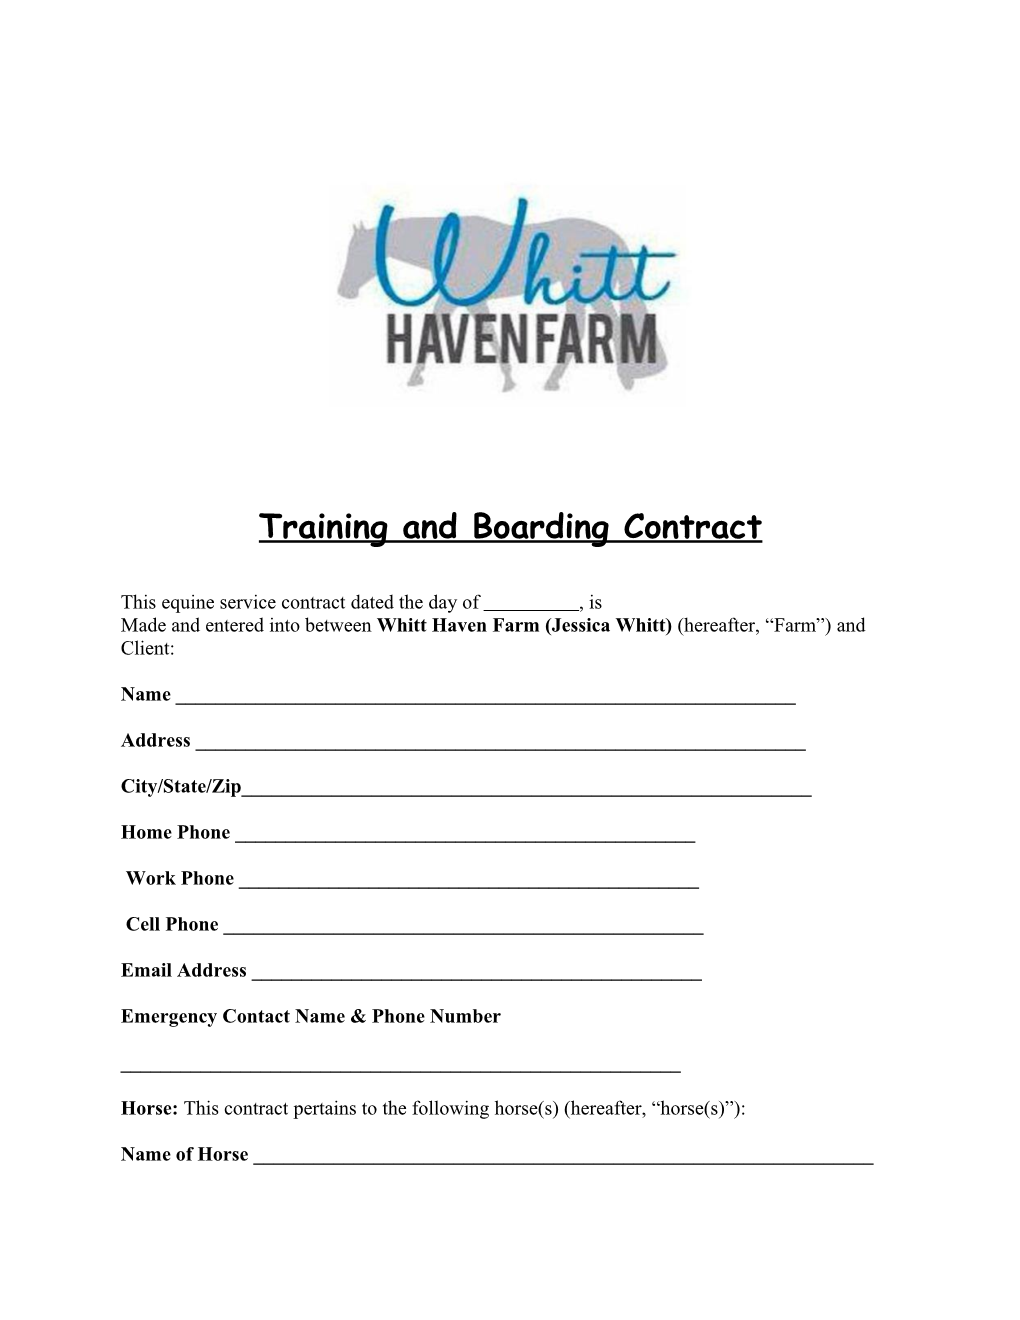 Training and Boarding Contract